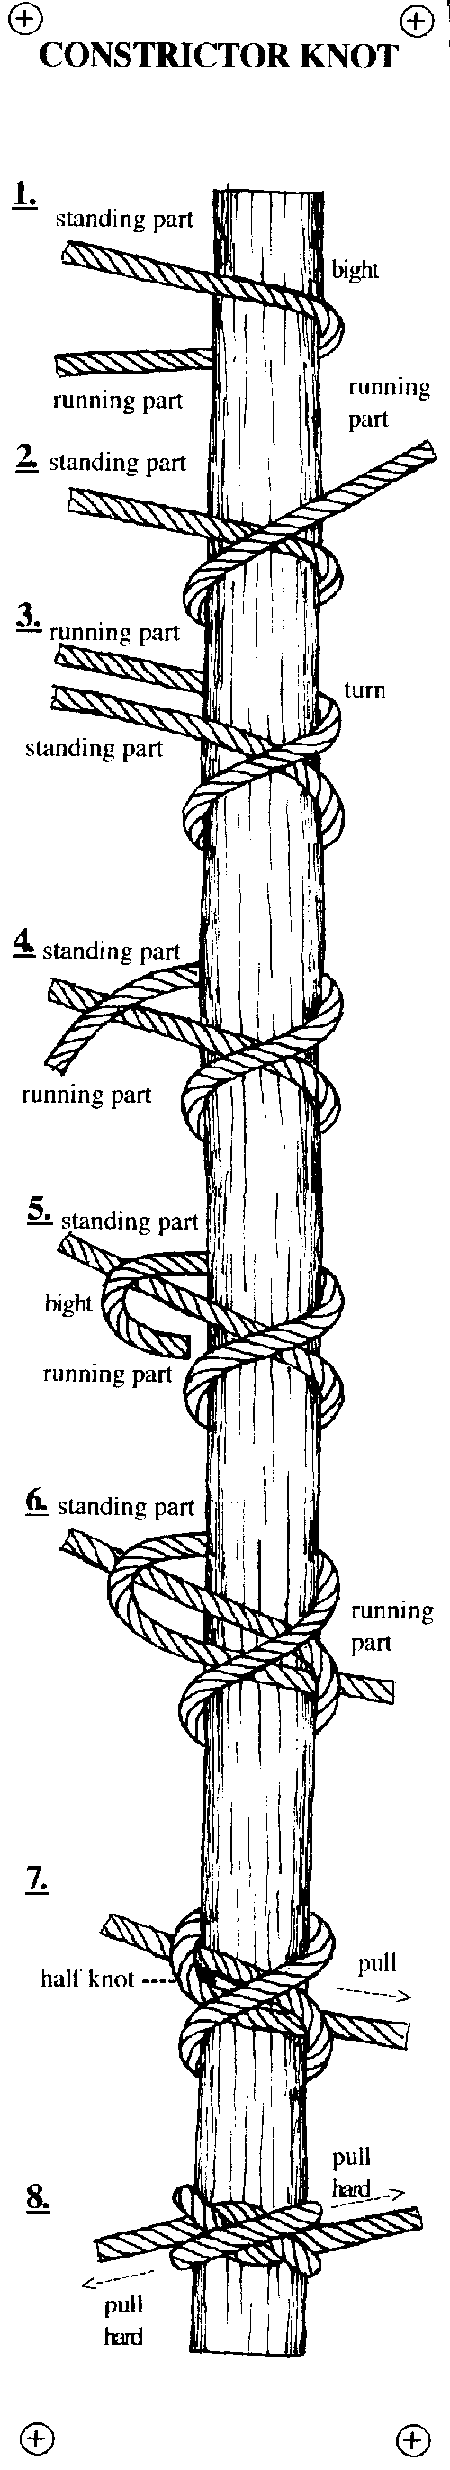 constrictor knot vs